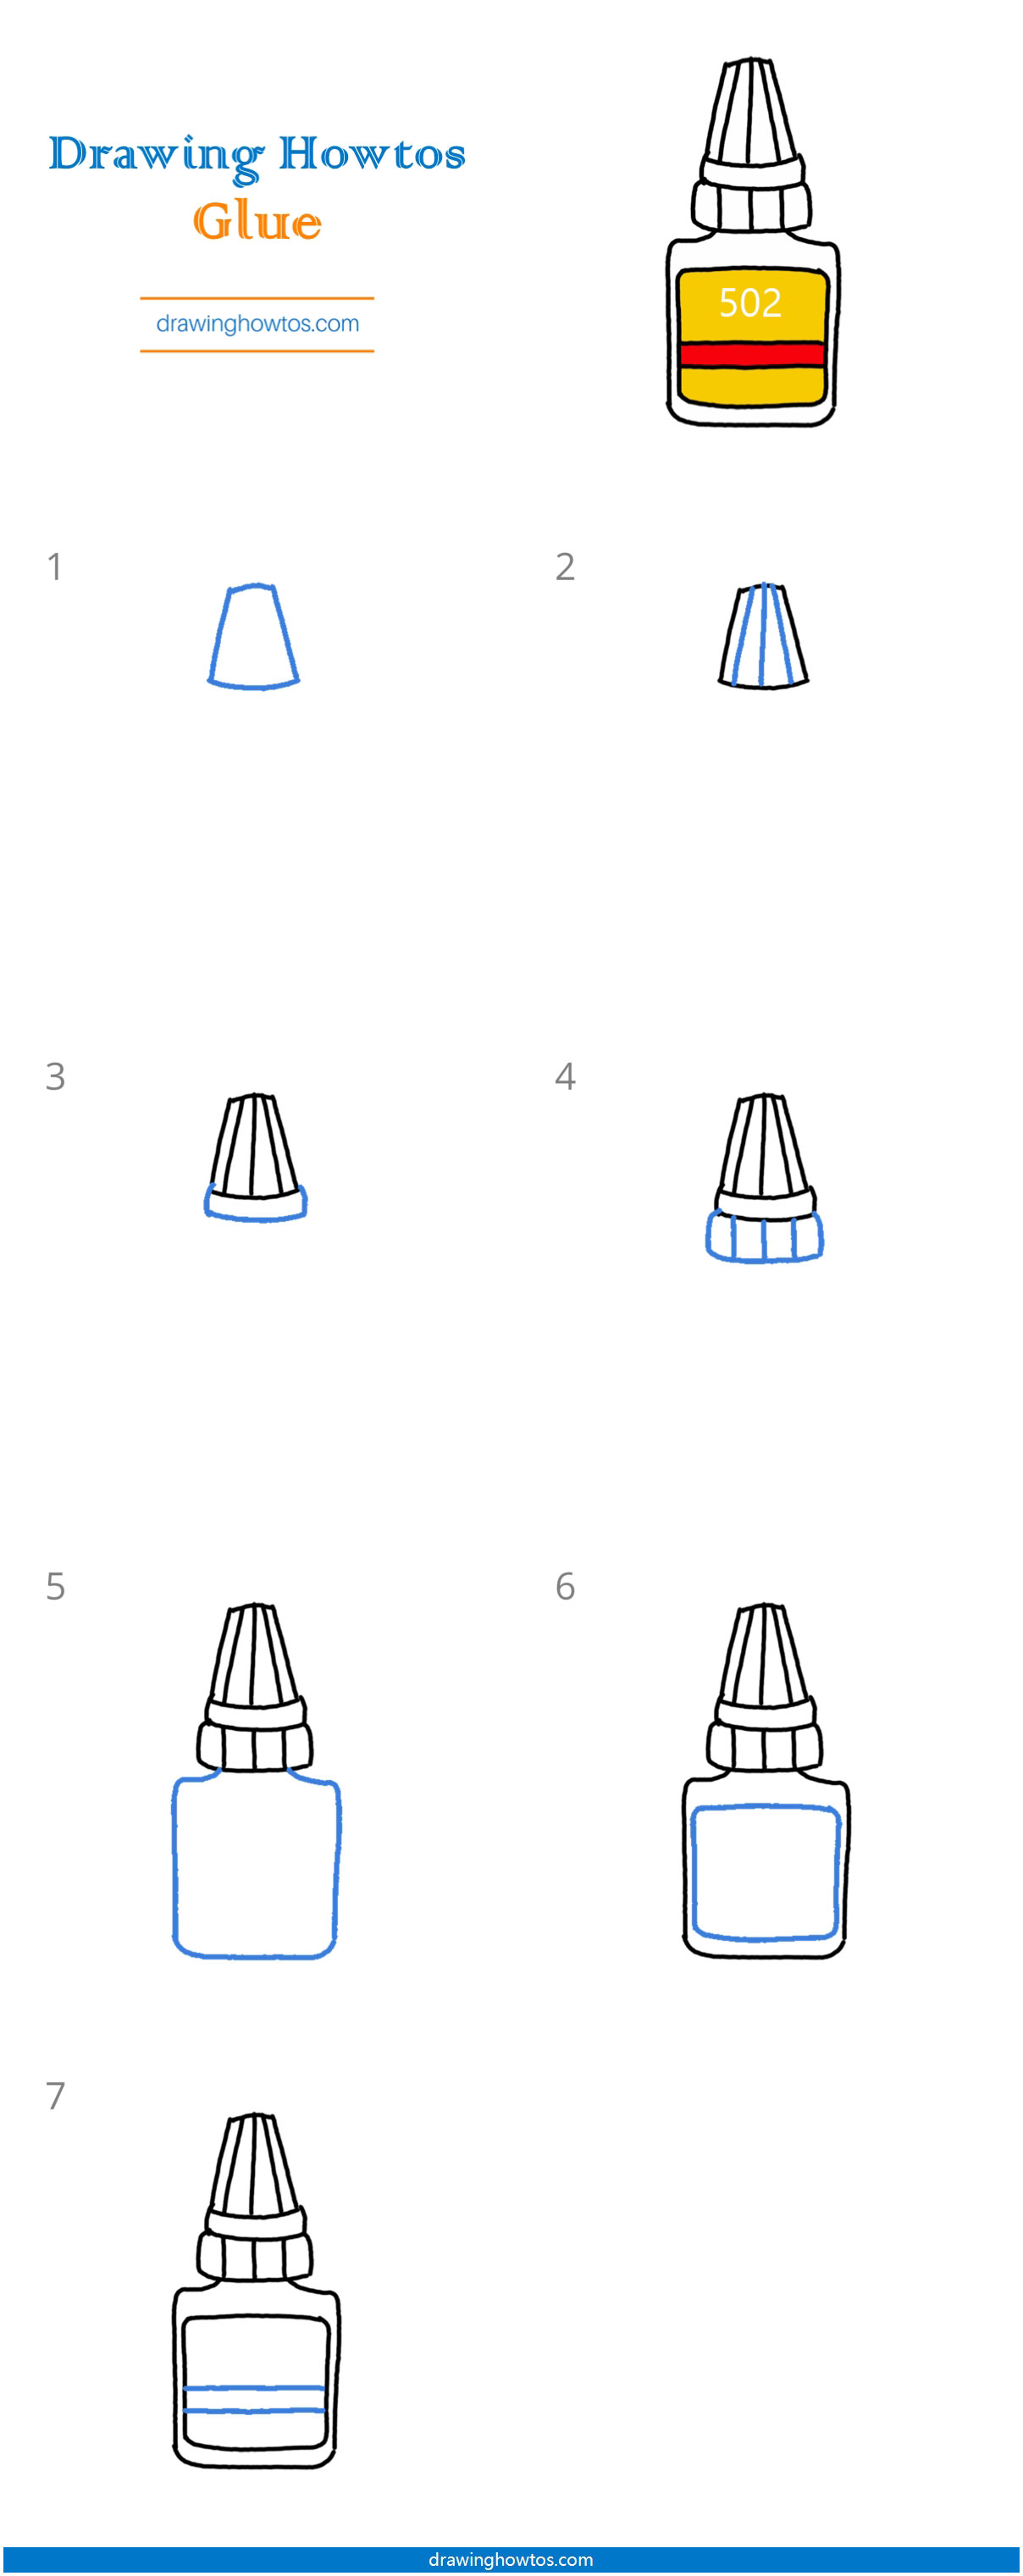 How to Draw a Glue Bottle Step by Step